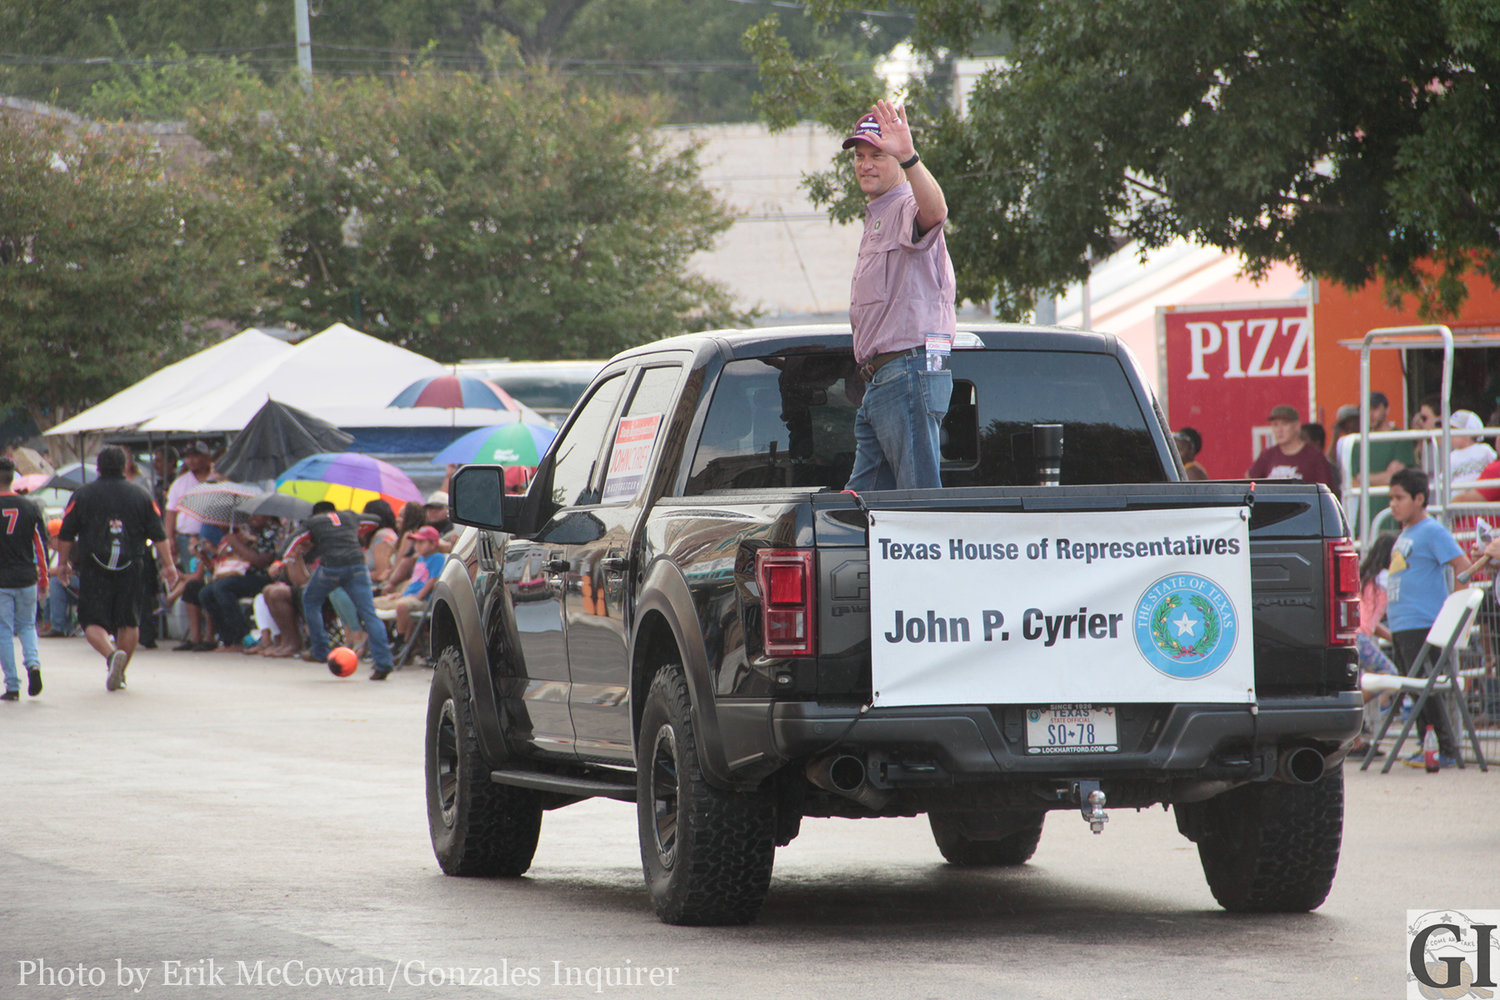 State Rep. John Cyrier (R-Lockhart) appeared in town during the Come and Take It parade. Now, he's planning for a robust legislative session and a return of some of the Texas House's “greatest hits.”